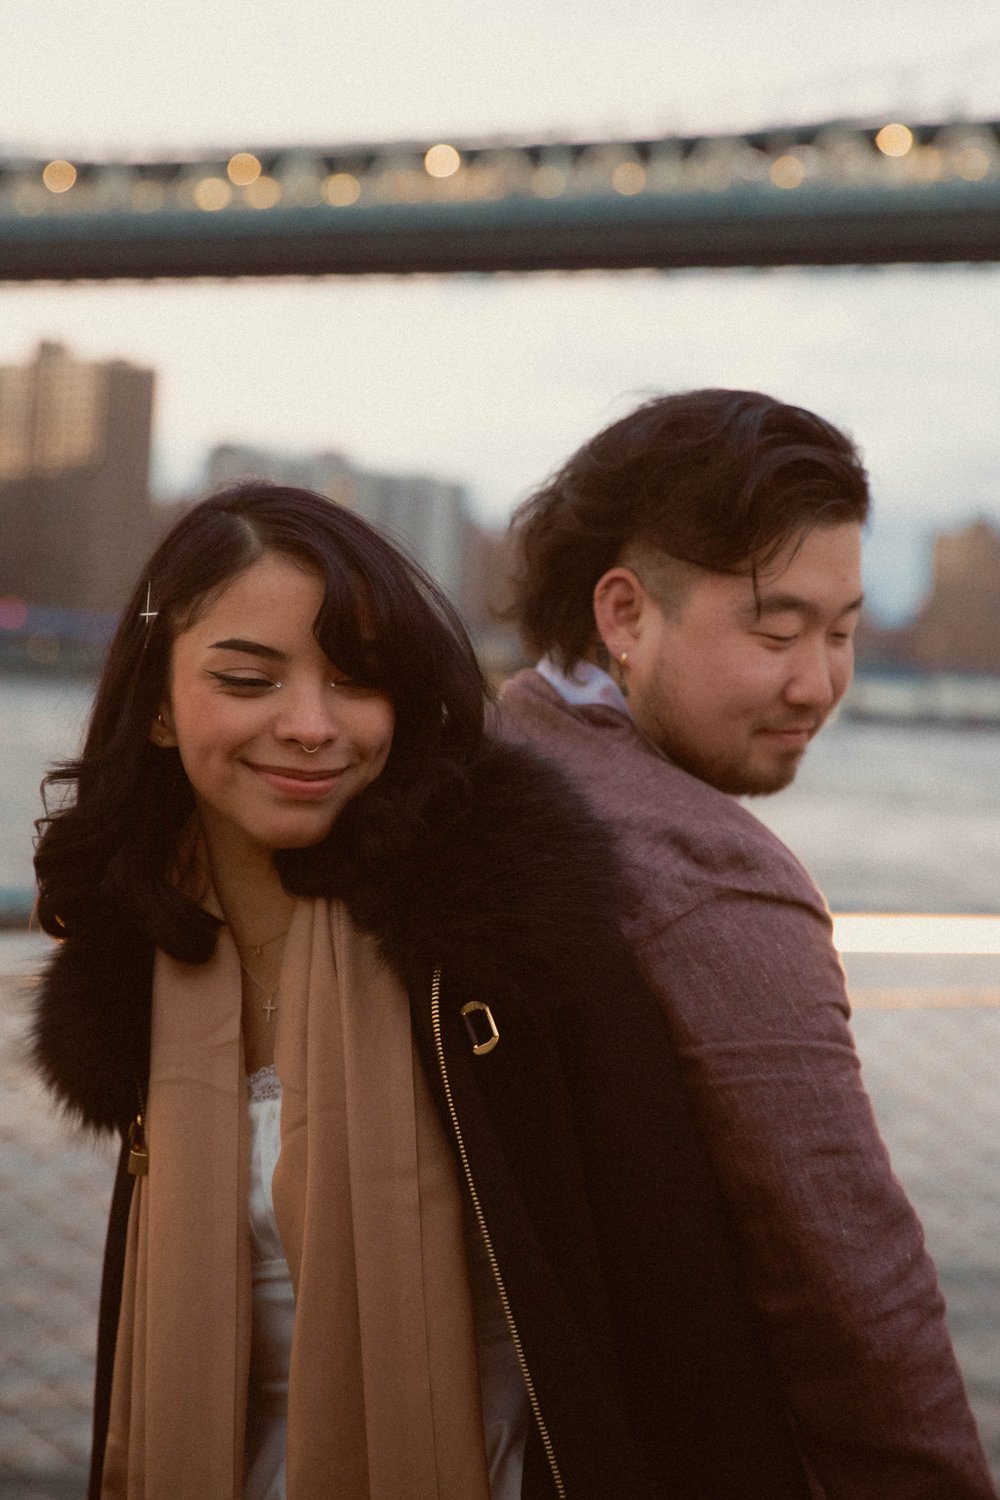 Explore a heartwarming 30-minute session in Dumbo, Brooklyn, where Josh surprised his long-distance girlfriend, Marizol, with a memorable Christmas gift.